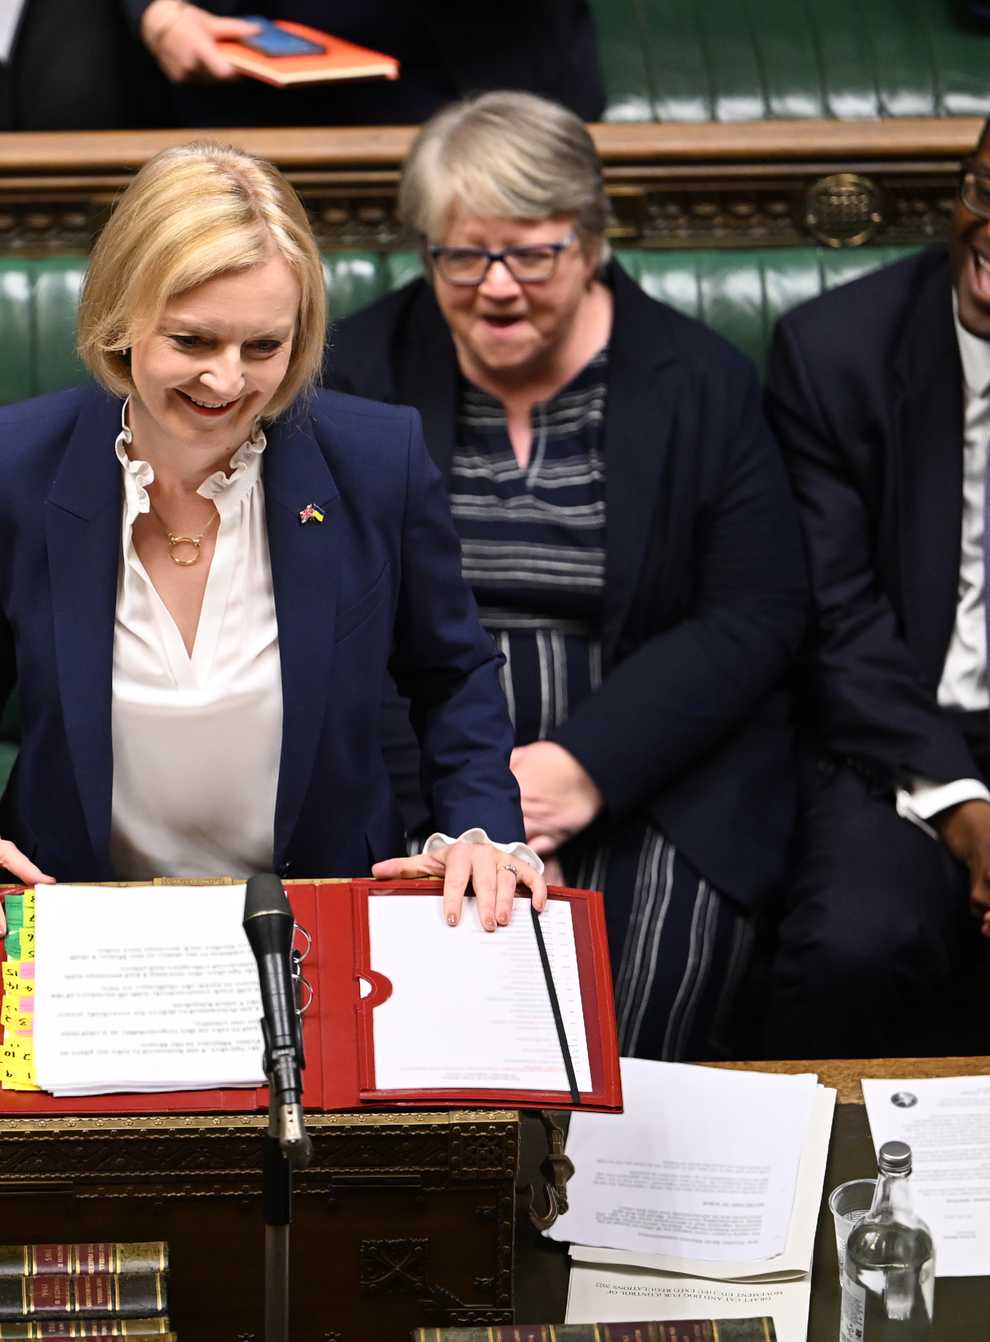 Liz Truss’s premiership will swing into action this week after a political pause to mark the Queen’s death, with a packed schedule of policy and diplomacy to follow the state funeral. (UK Parliament/Jessica Taylor/PA)